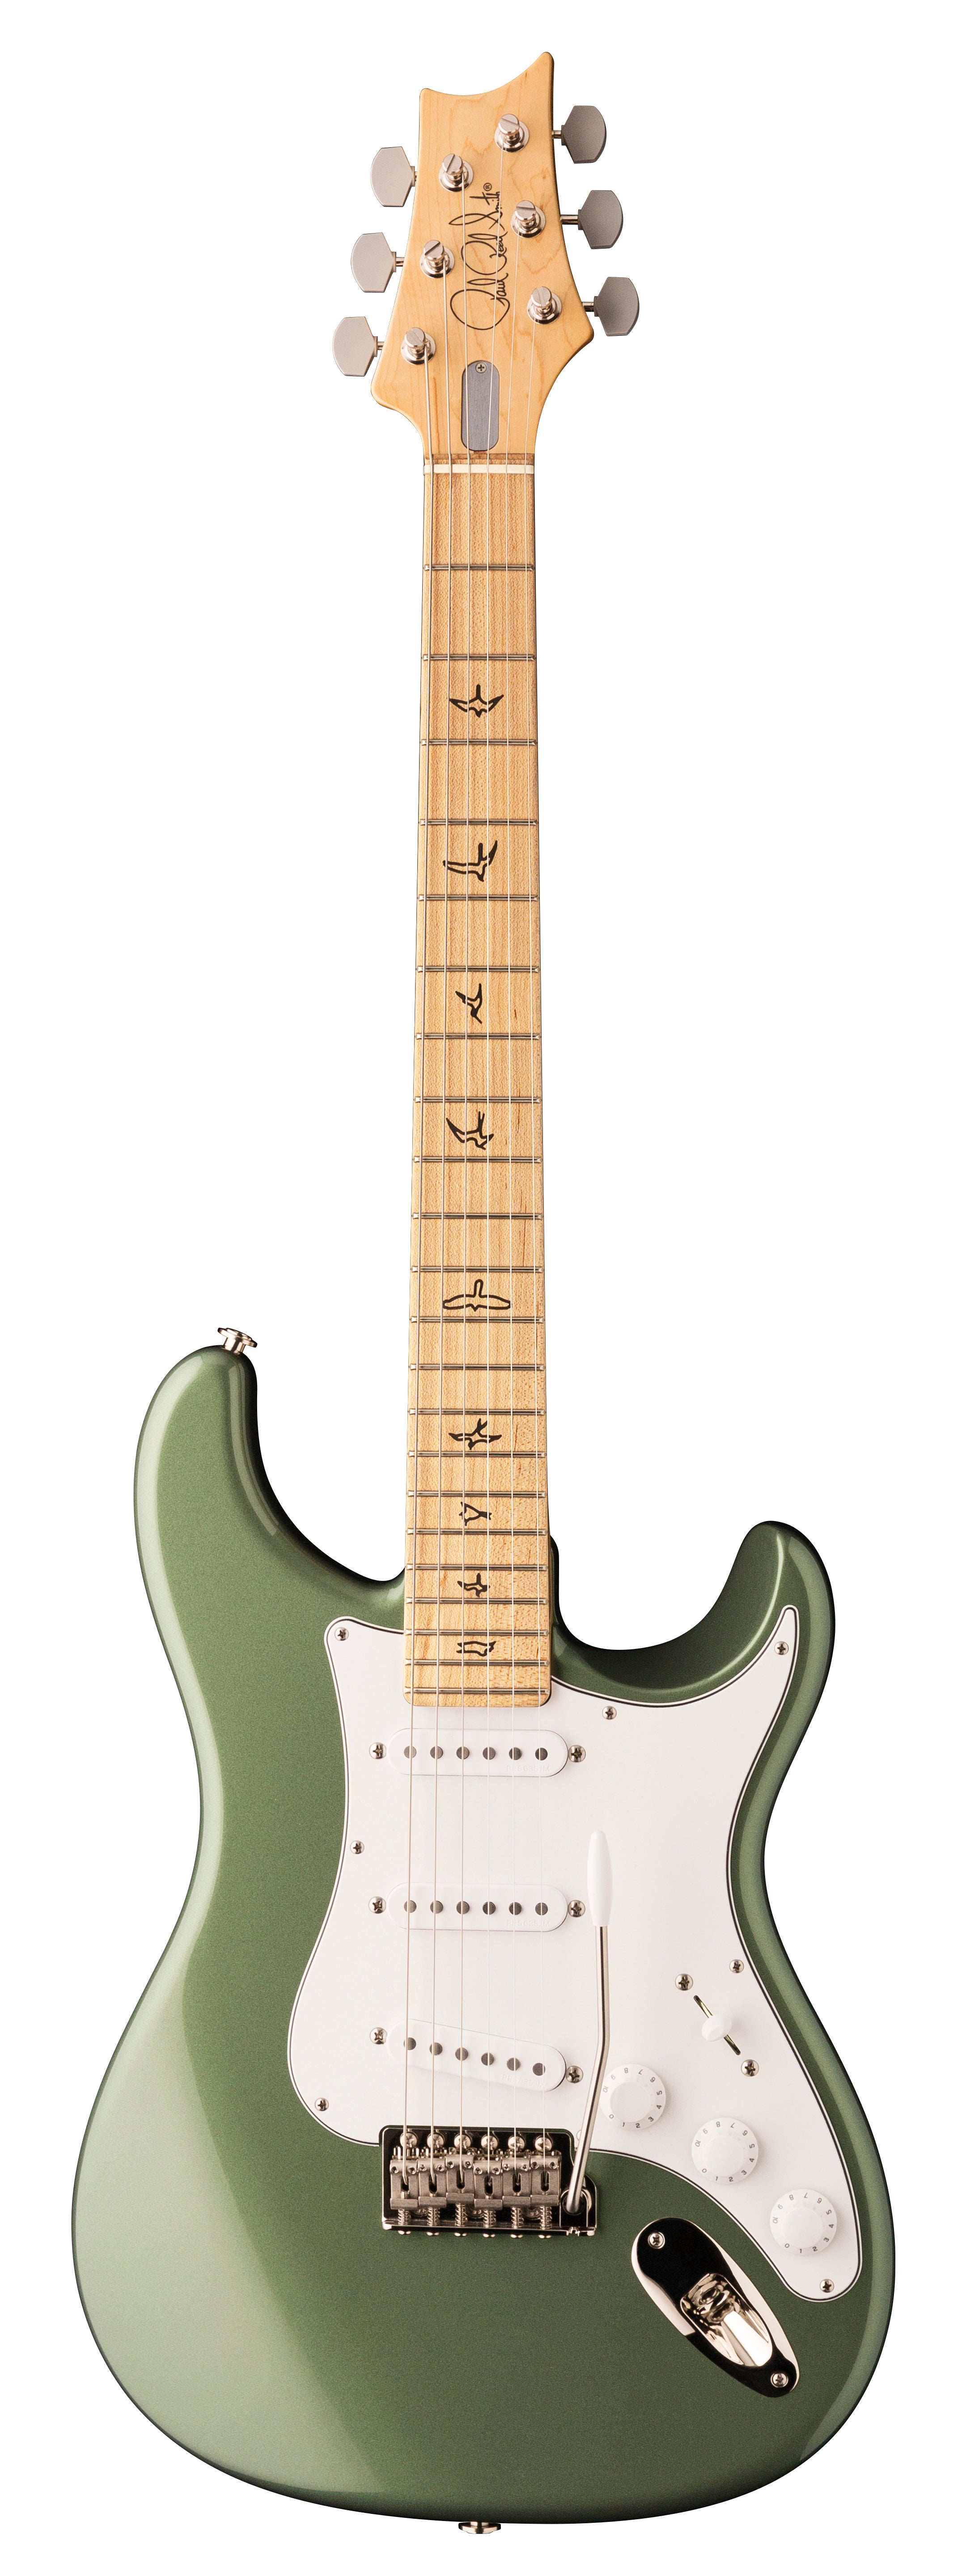 PRS Bolt-On Signature Silver Sky Series Electric Guitar - Maple Fretboard (Orion Green)